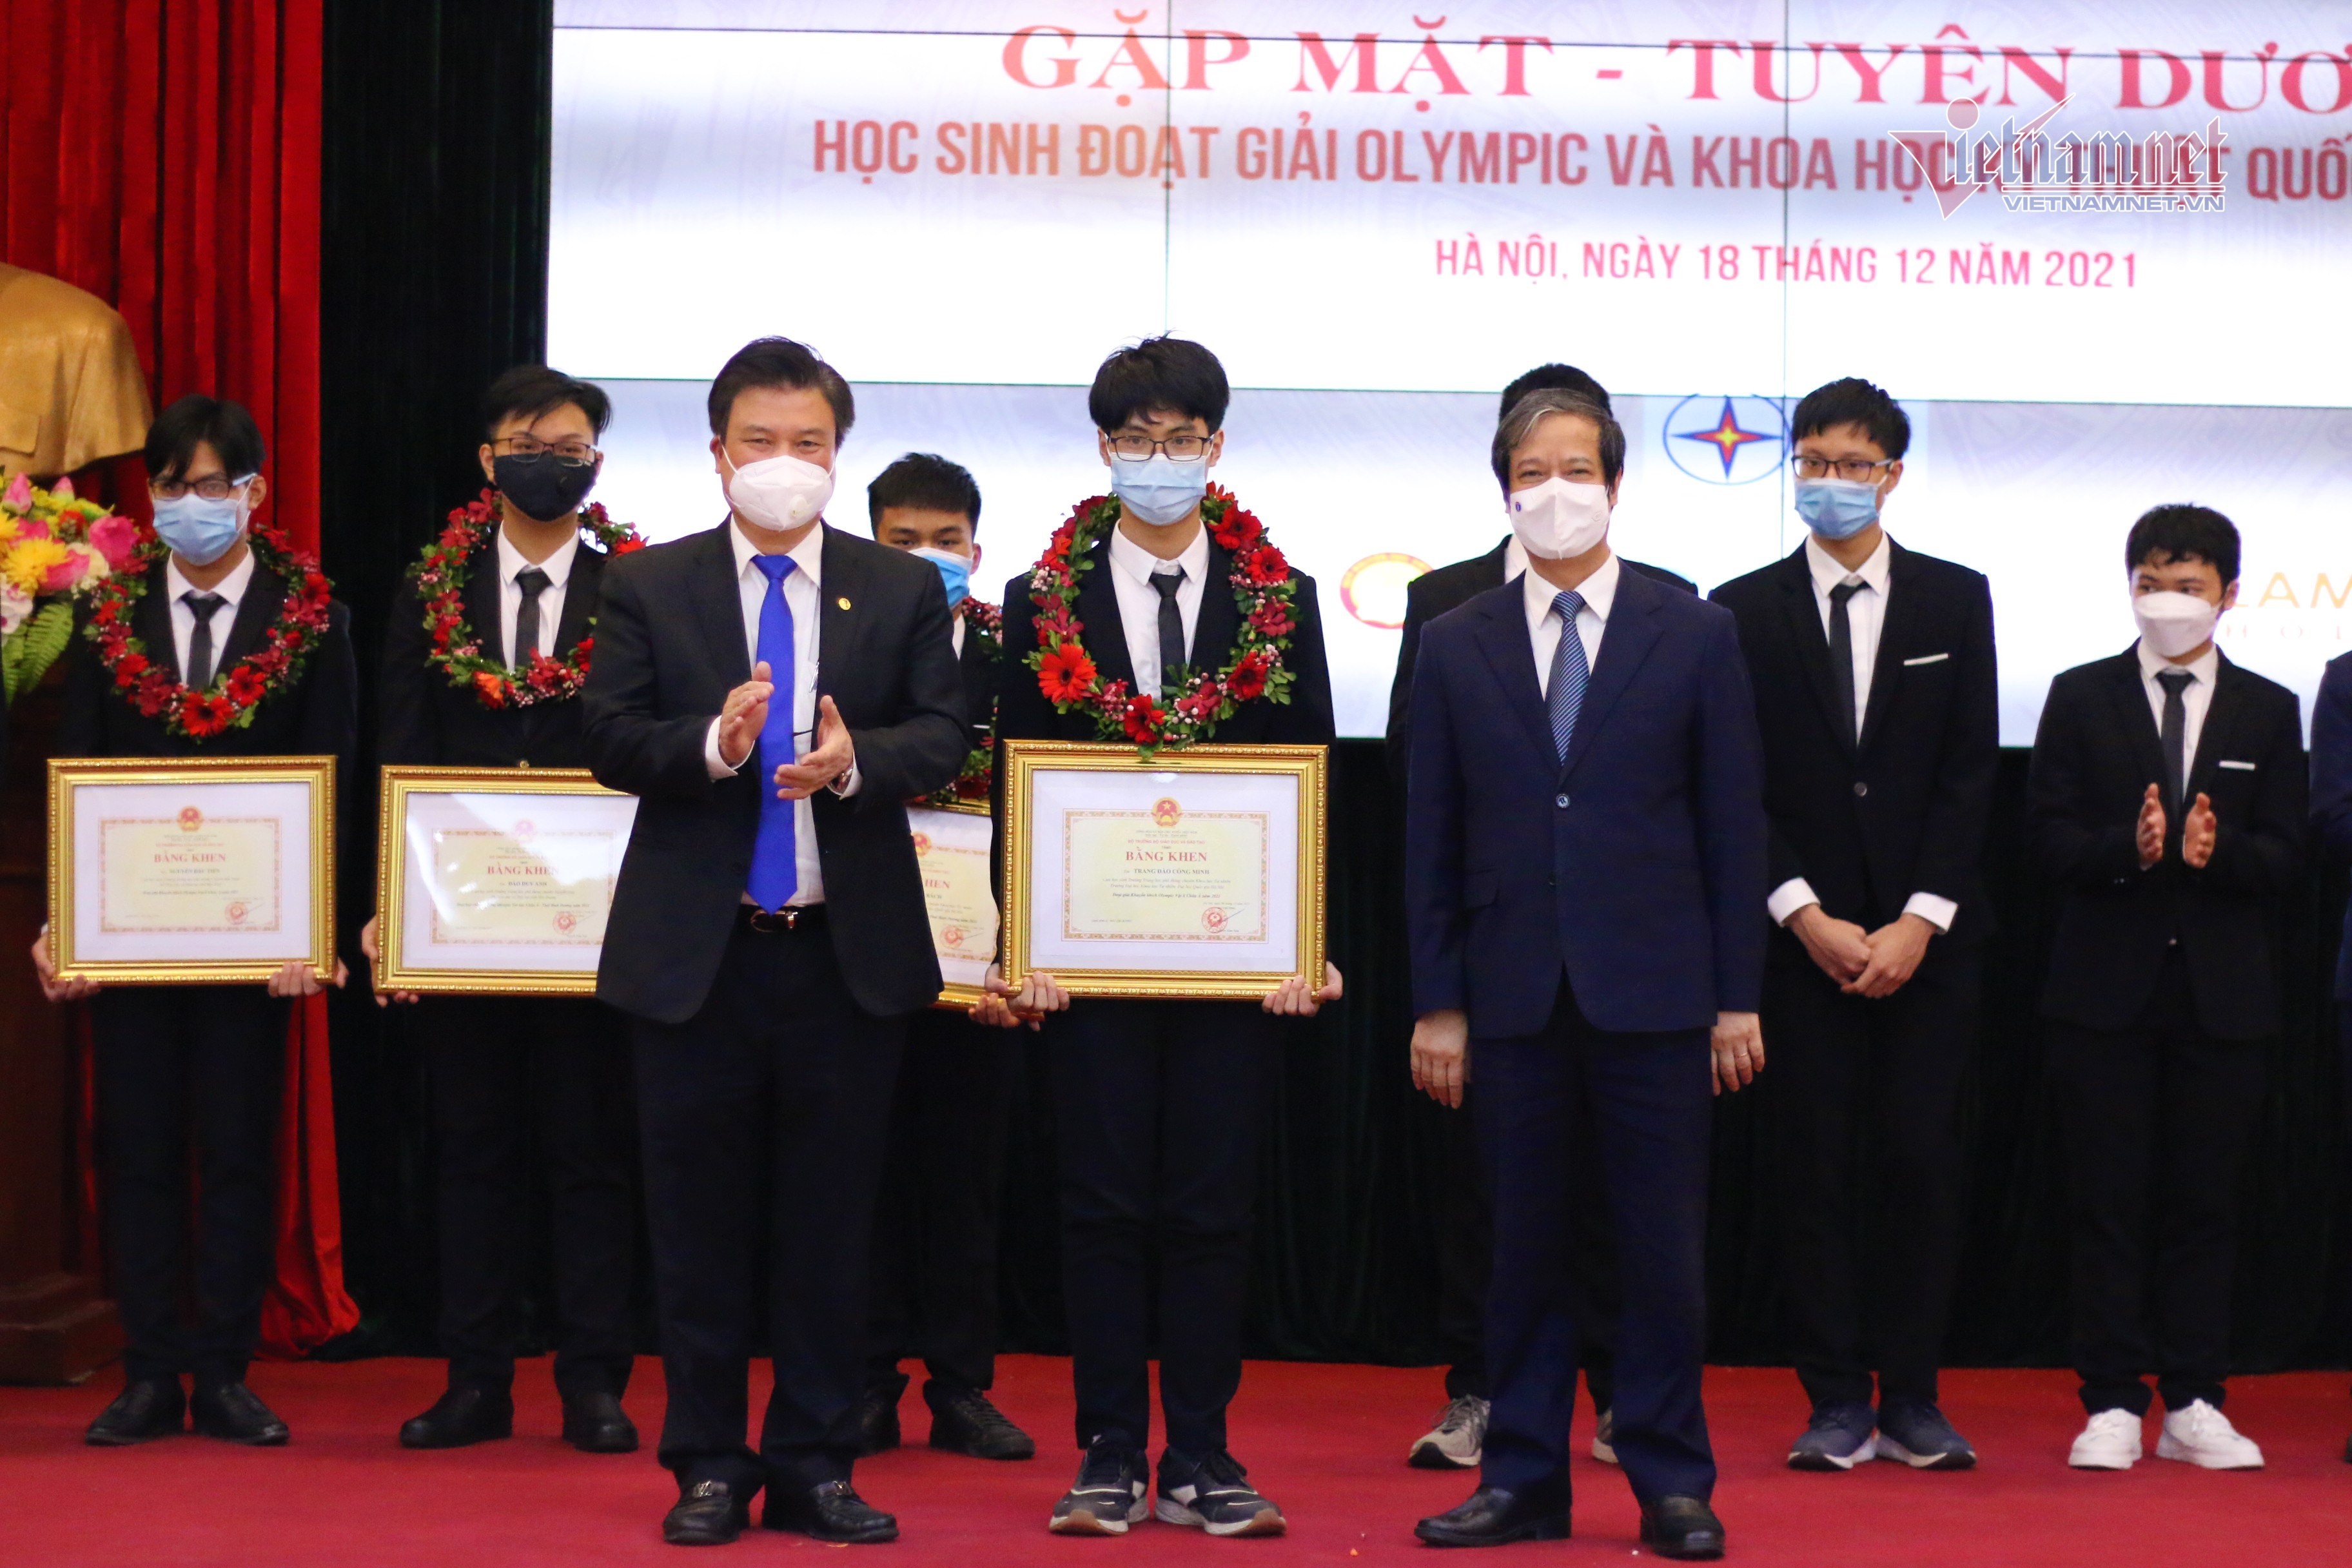 Standards of reward for students winning in national and international competitions in Vietnam